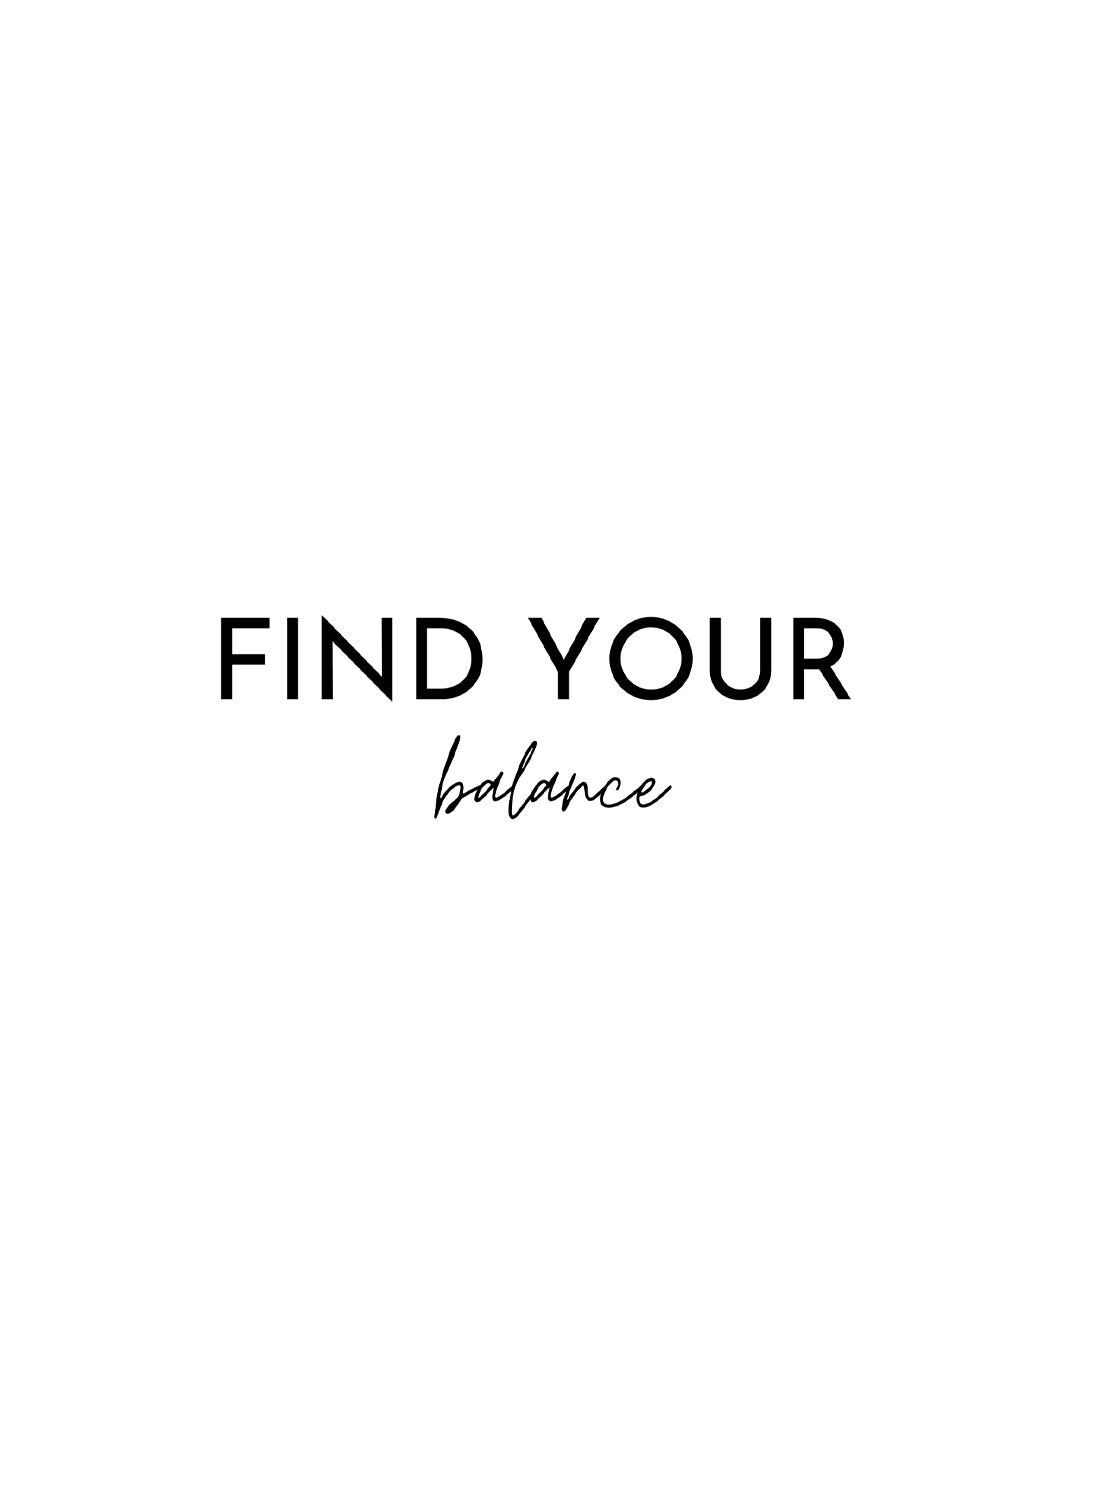 Find Your Balance Poster